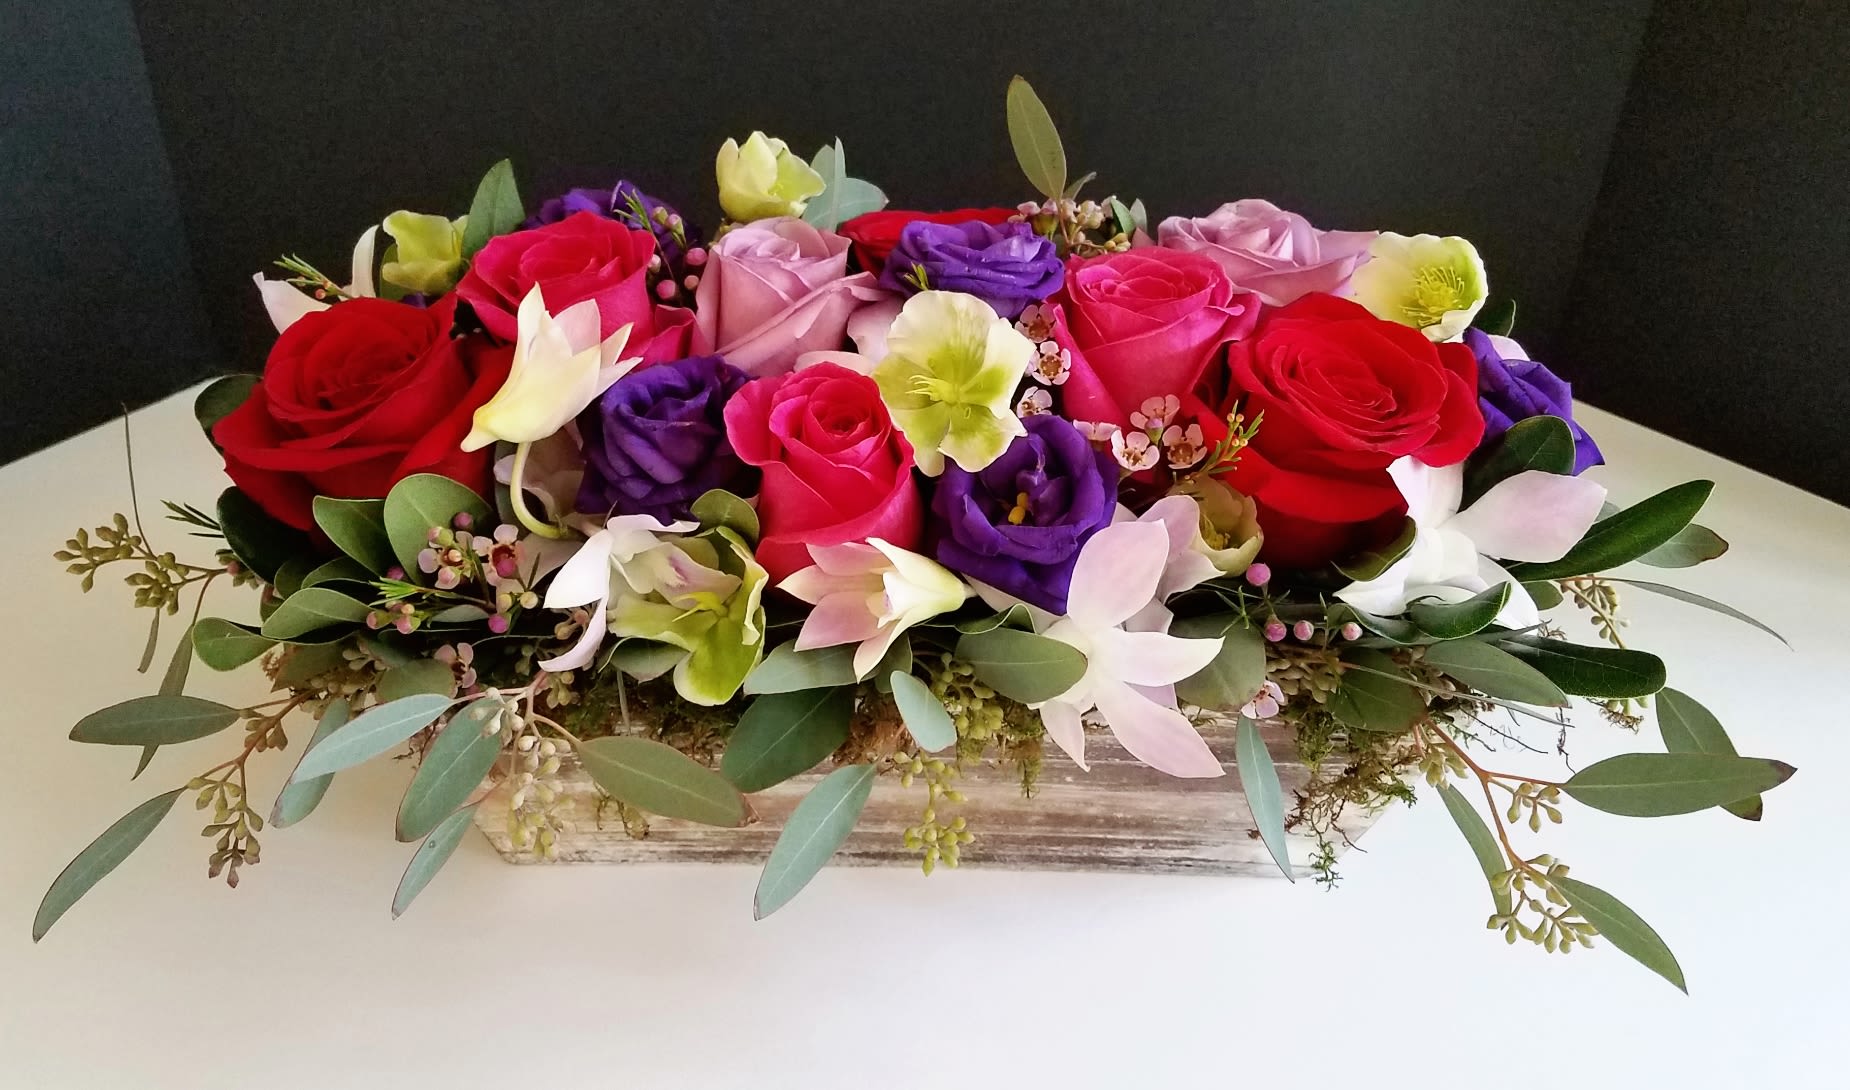 Garden of Romance - An elegant low style wooden box filled with roses in lavender, red and hot pink and touches of purple lisianthus, green hellebores and dendrobium orchids finished with seeded eucalyptus.